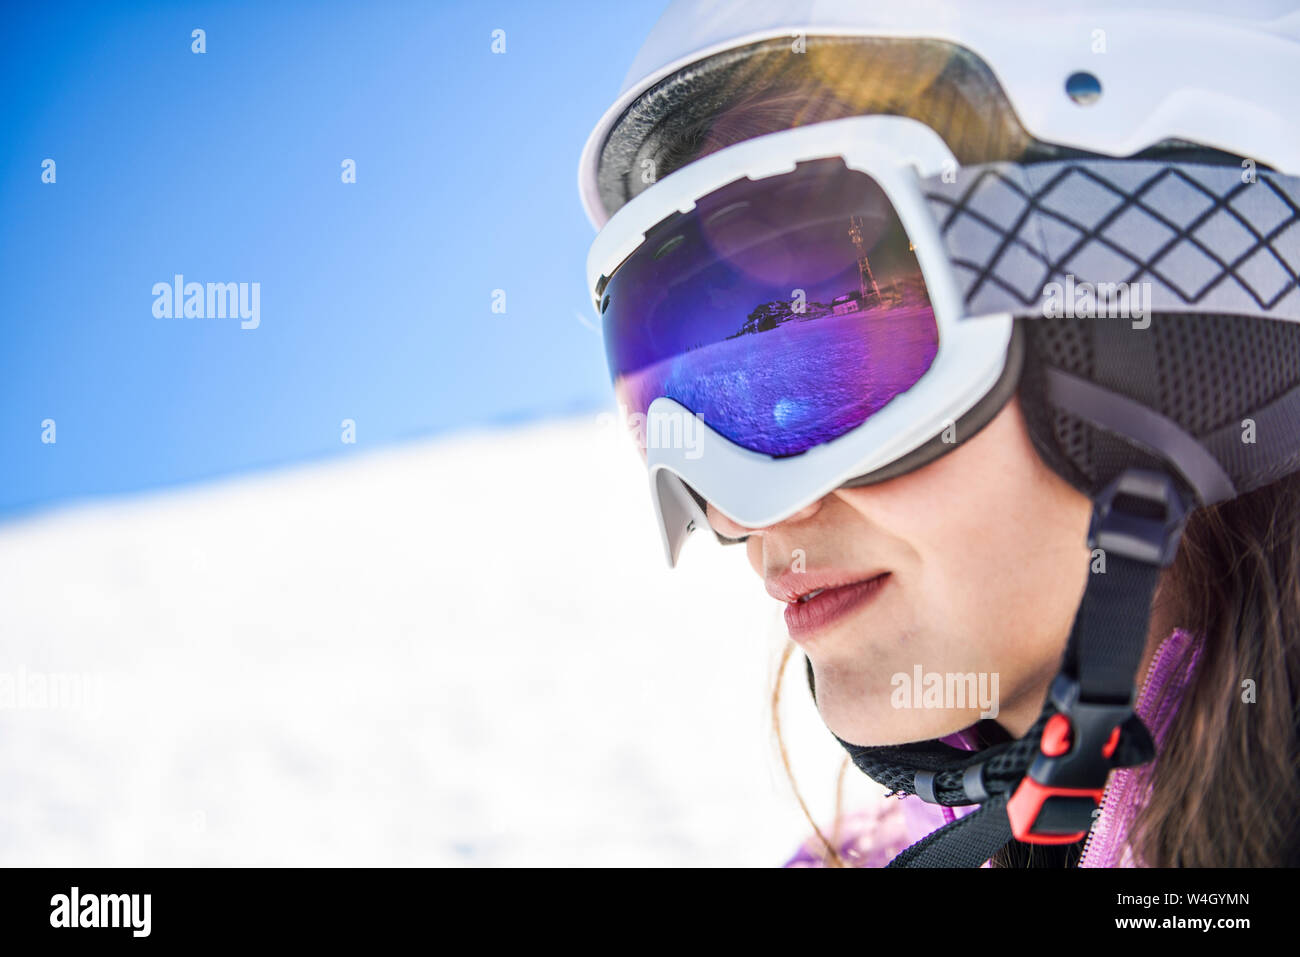 Snowy landscape reflected in ski goggles ofa woman, Sierra Nevada, Andalusia, Spain Stock Photo